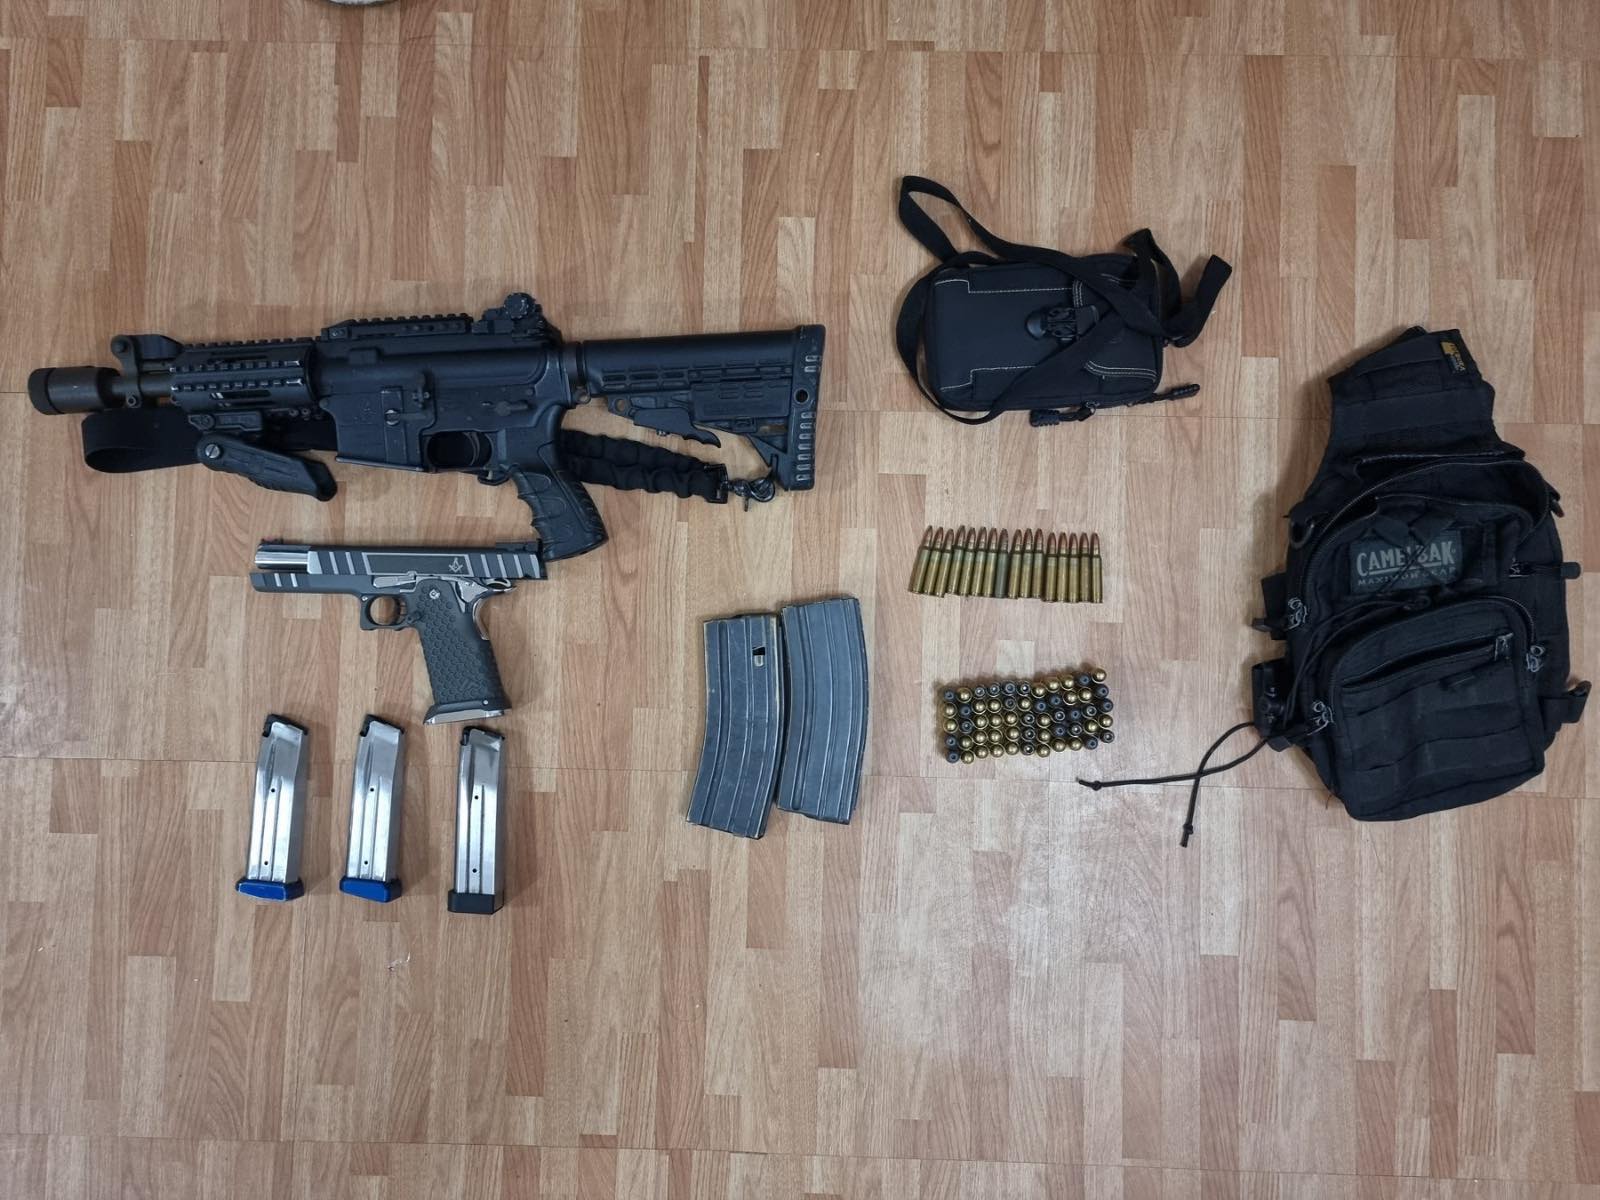 Batangas town Mayor, 2 brothers nabbed for illegal possession of firearms, explosives — CIDG